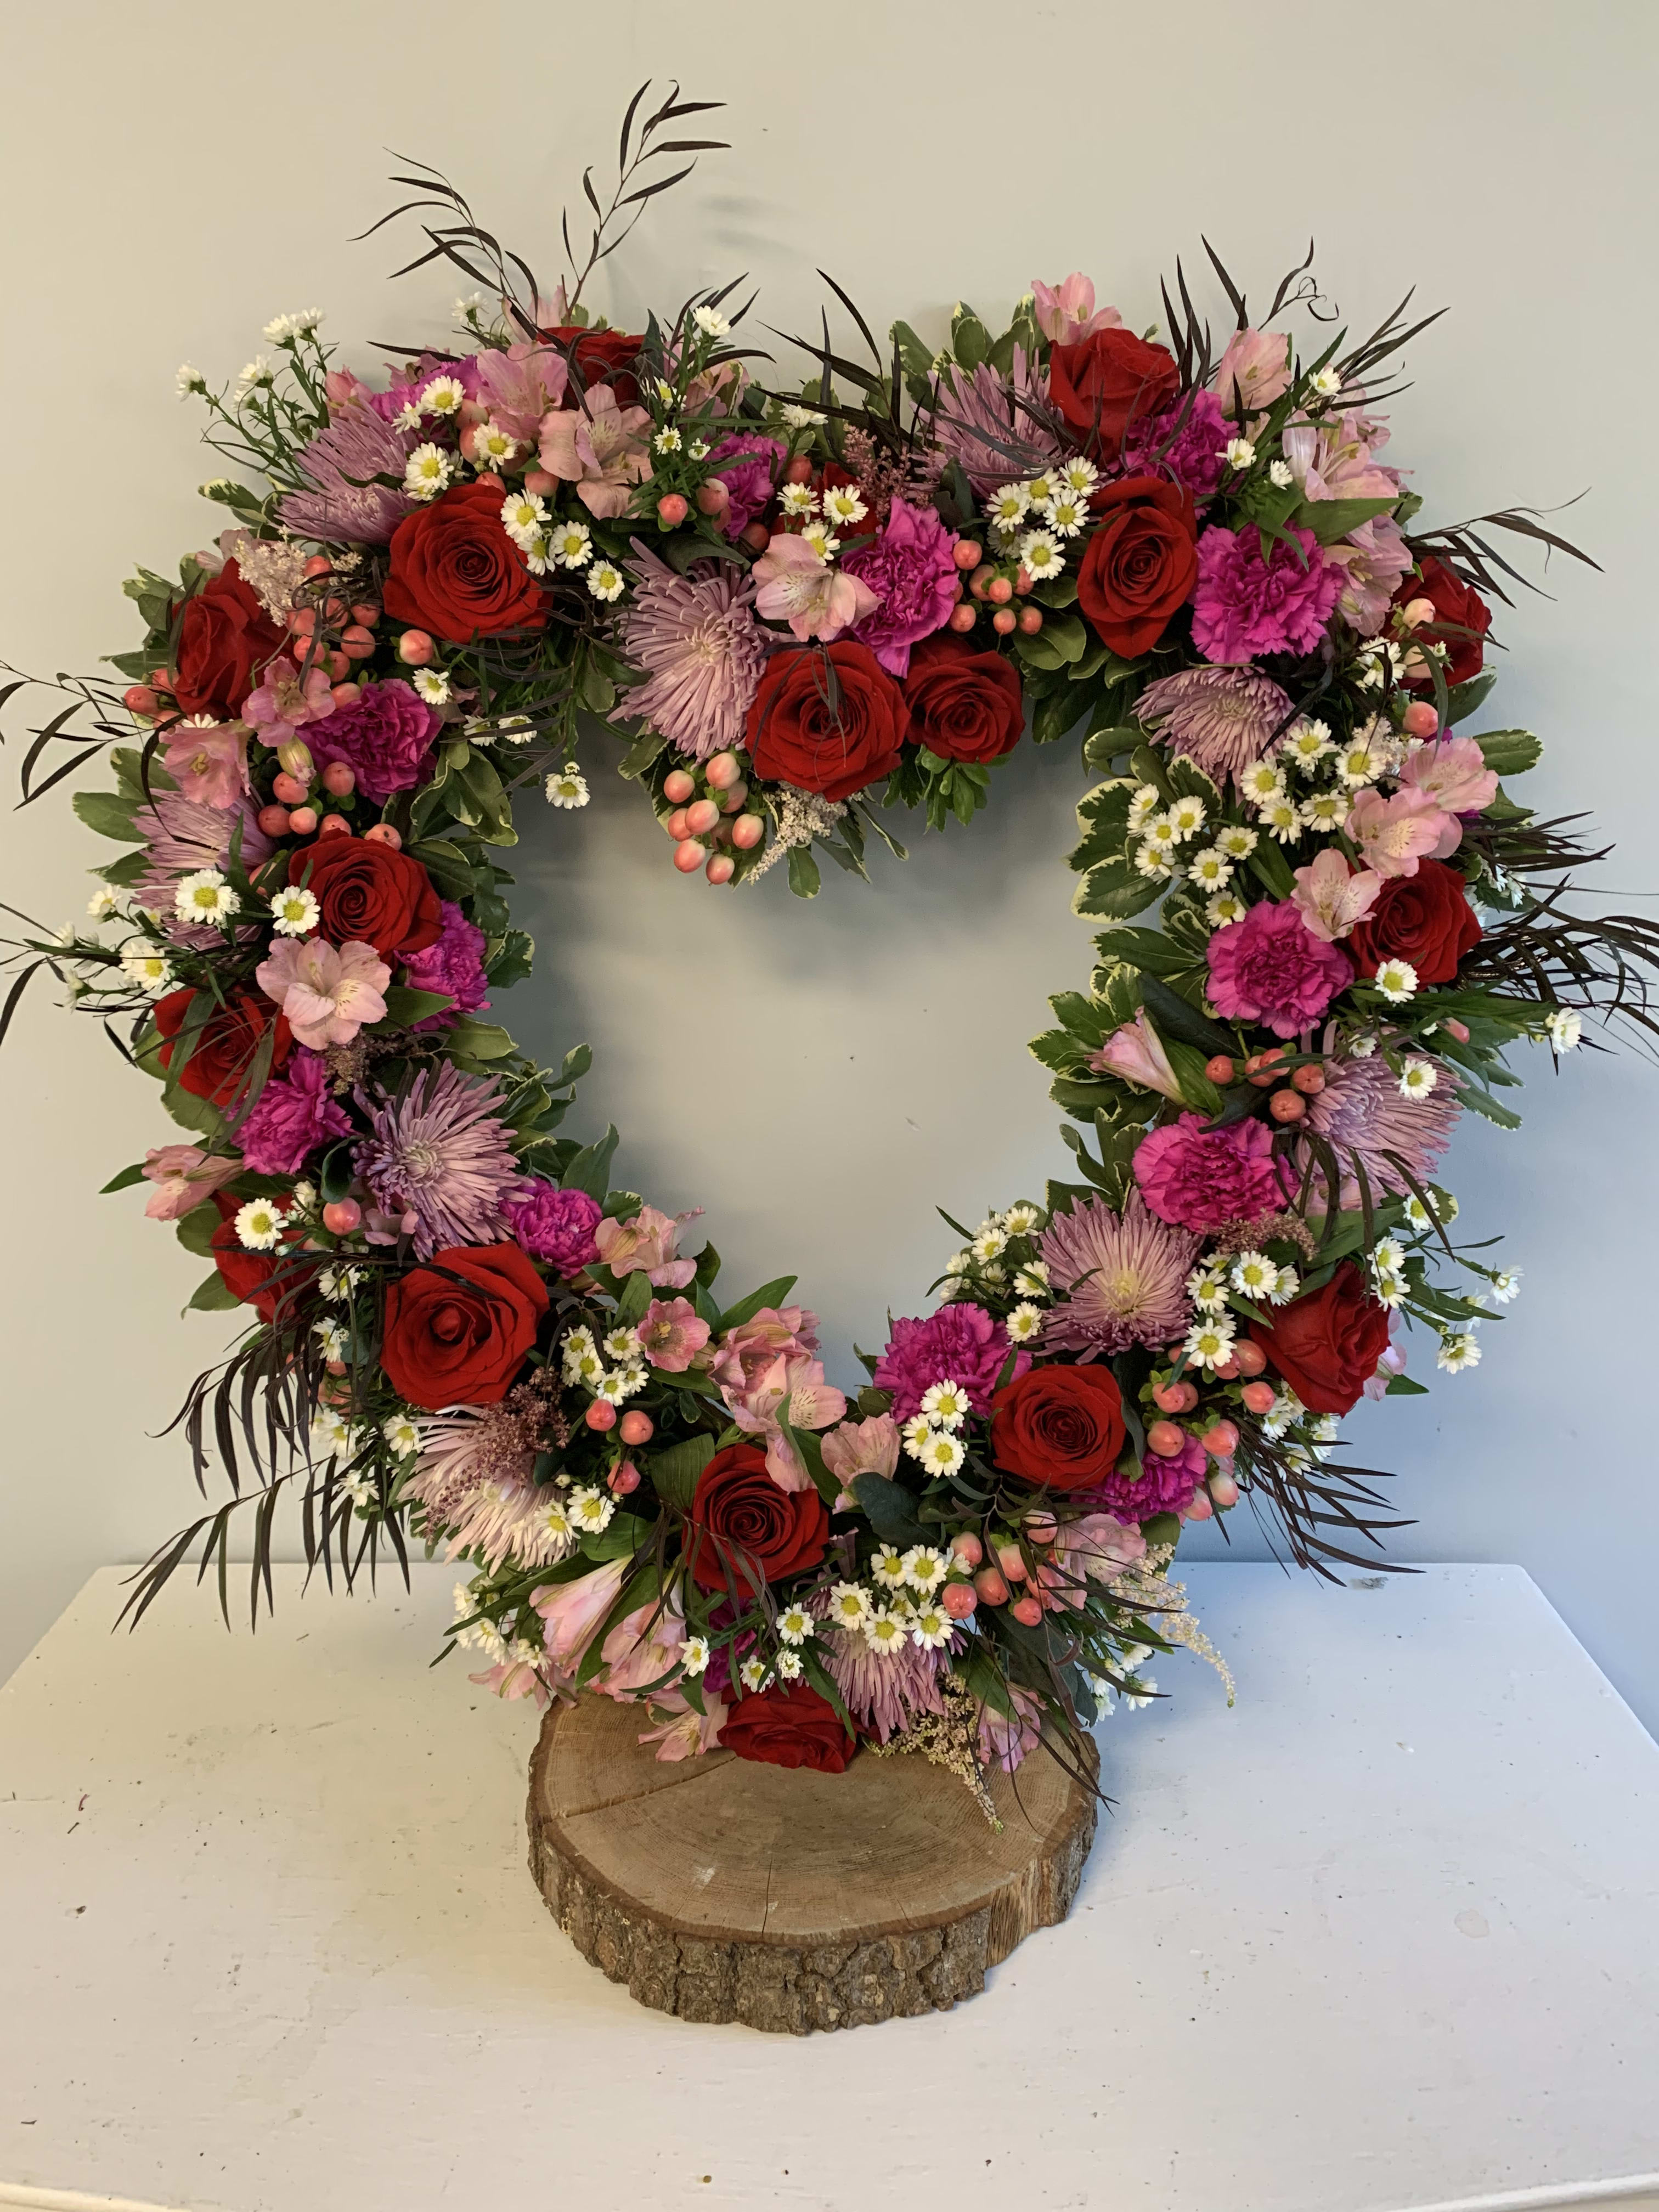 Red,purple,pink open heart - This large open heart wreath is filled with purple,red,pink flowers